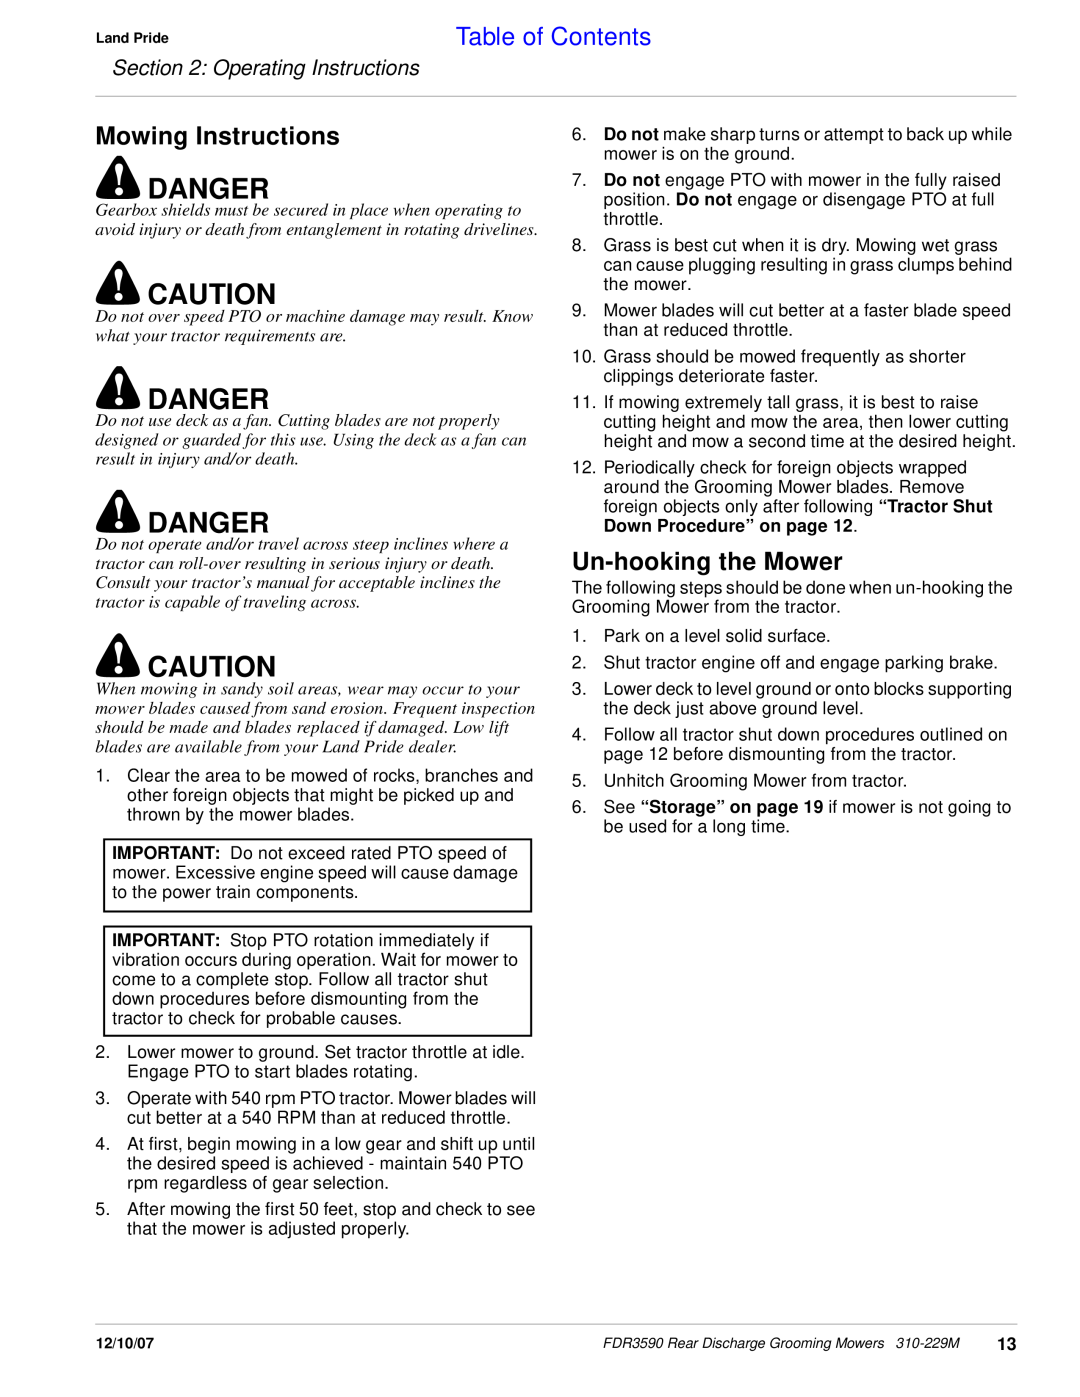 Land Pride FDR3590 manual Mowing Instructions, Un-hookingthe Mower, Danger, Table of Contents, Operating Instructions 